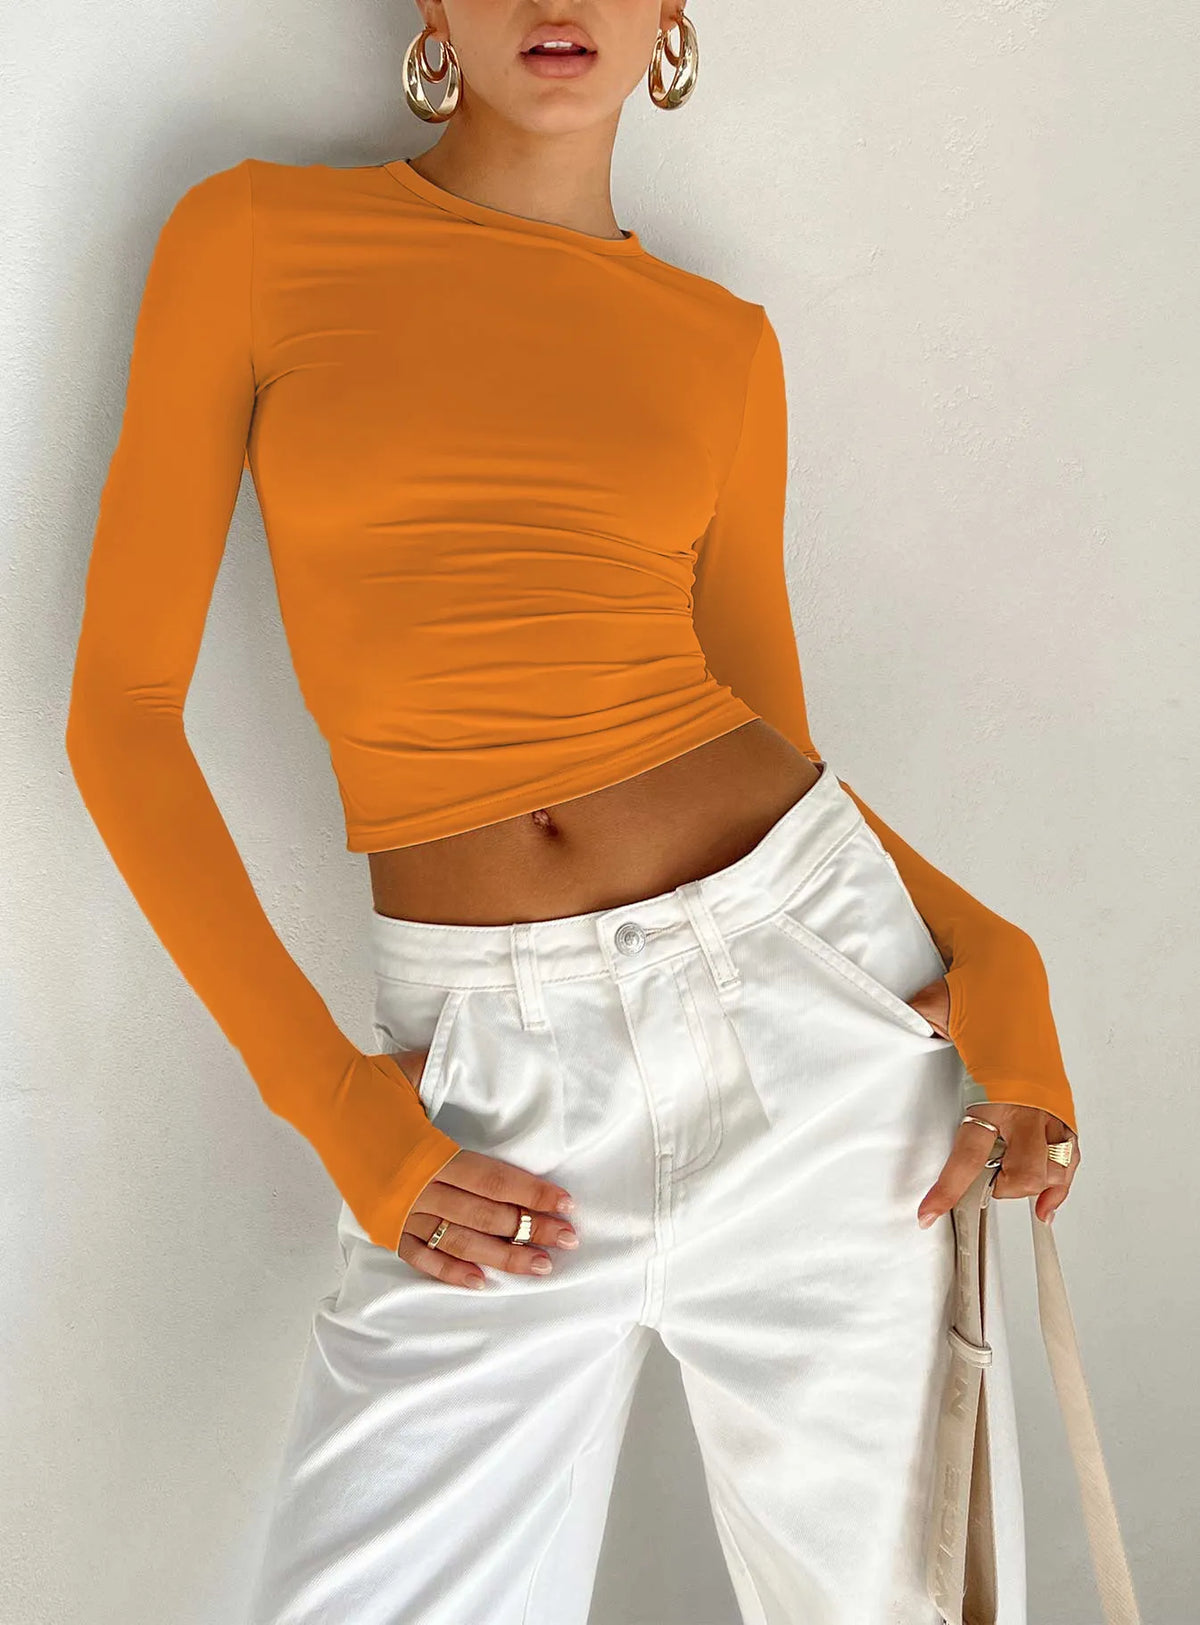 Fashion Women T-shirt Long Sleeve Crew Neck Solid Slim Fit Ladies Crop Top with Thumb Holes for Daily Streetwear Summer Camis